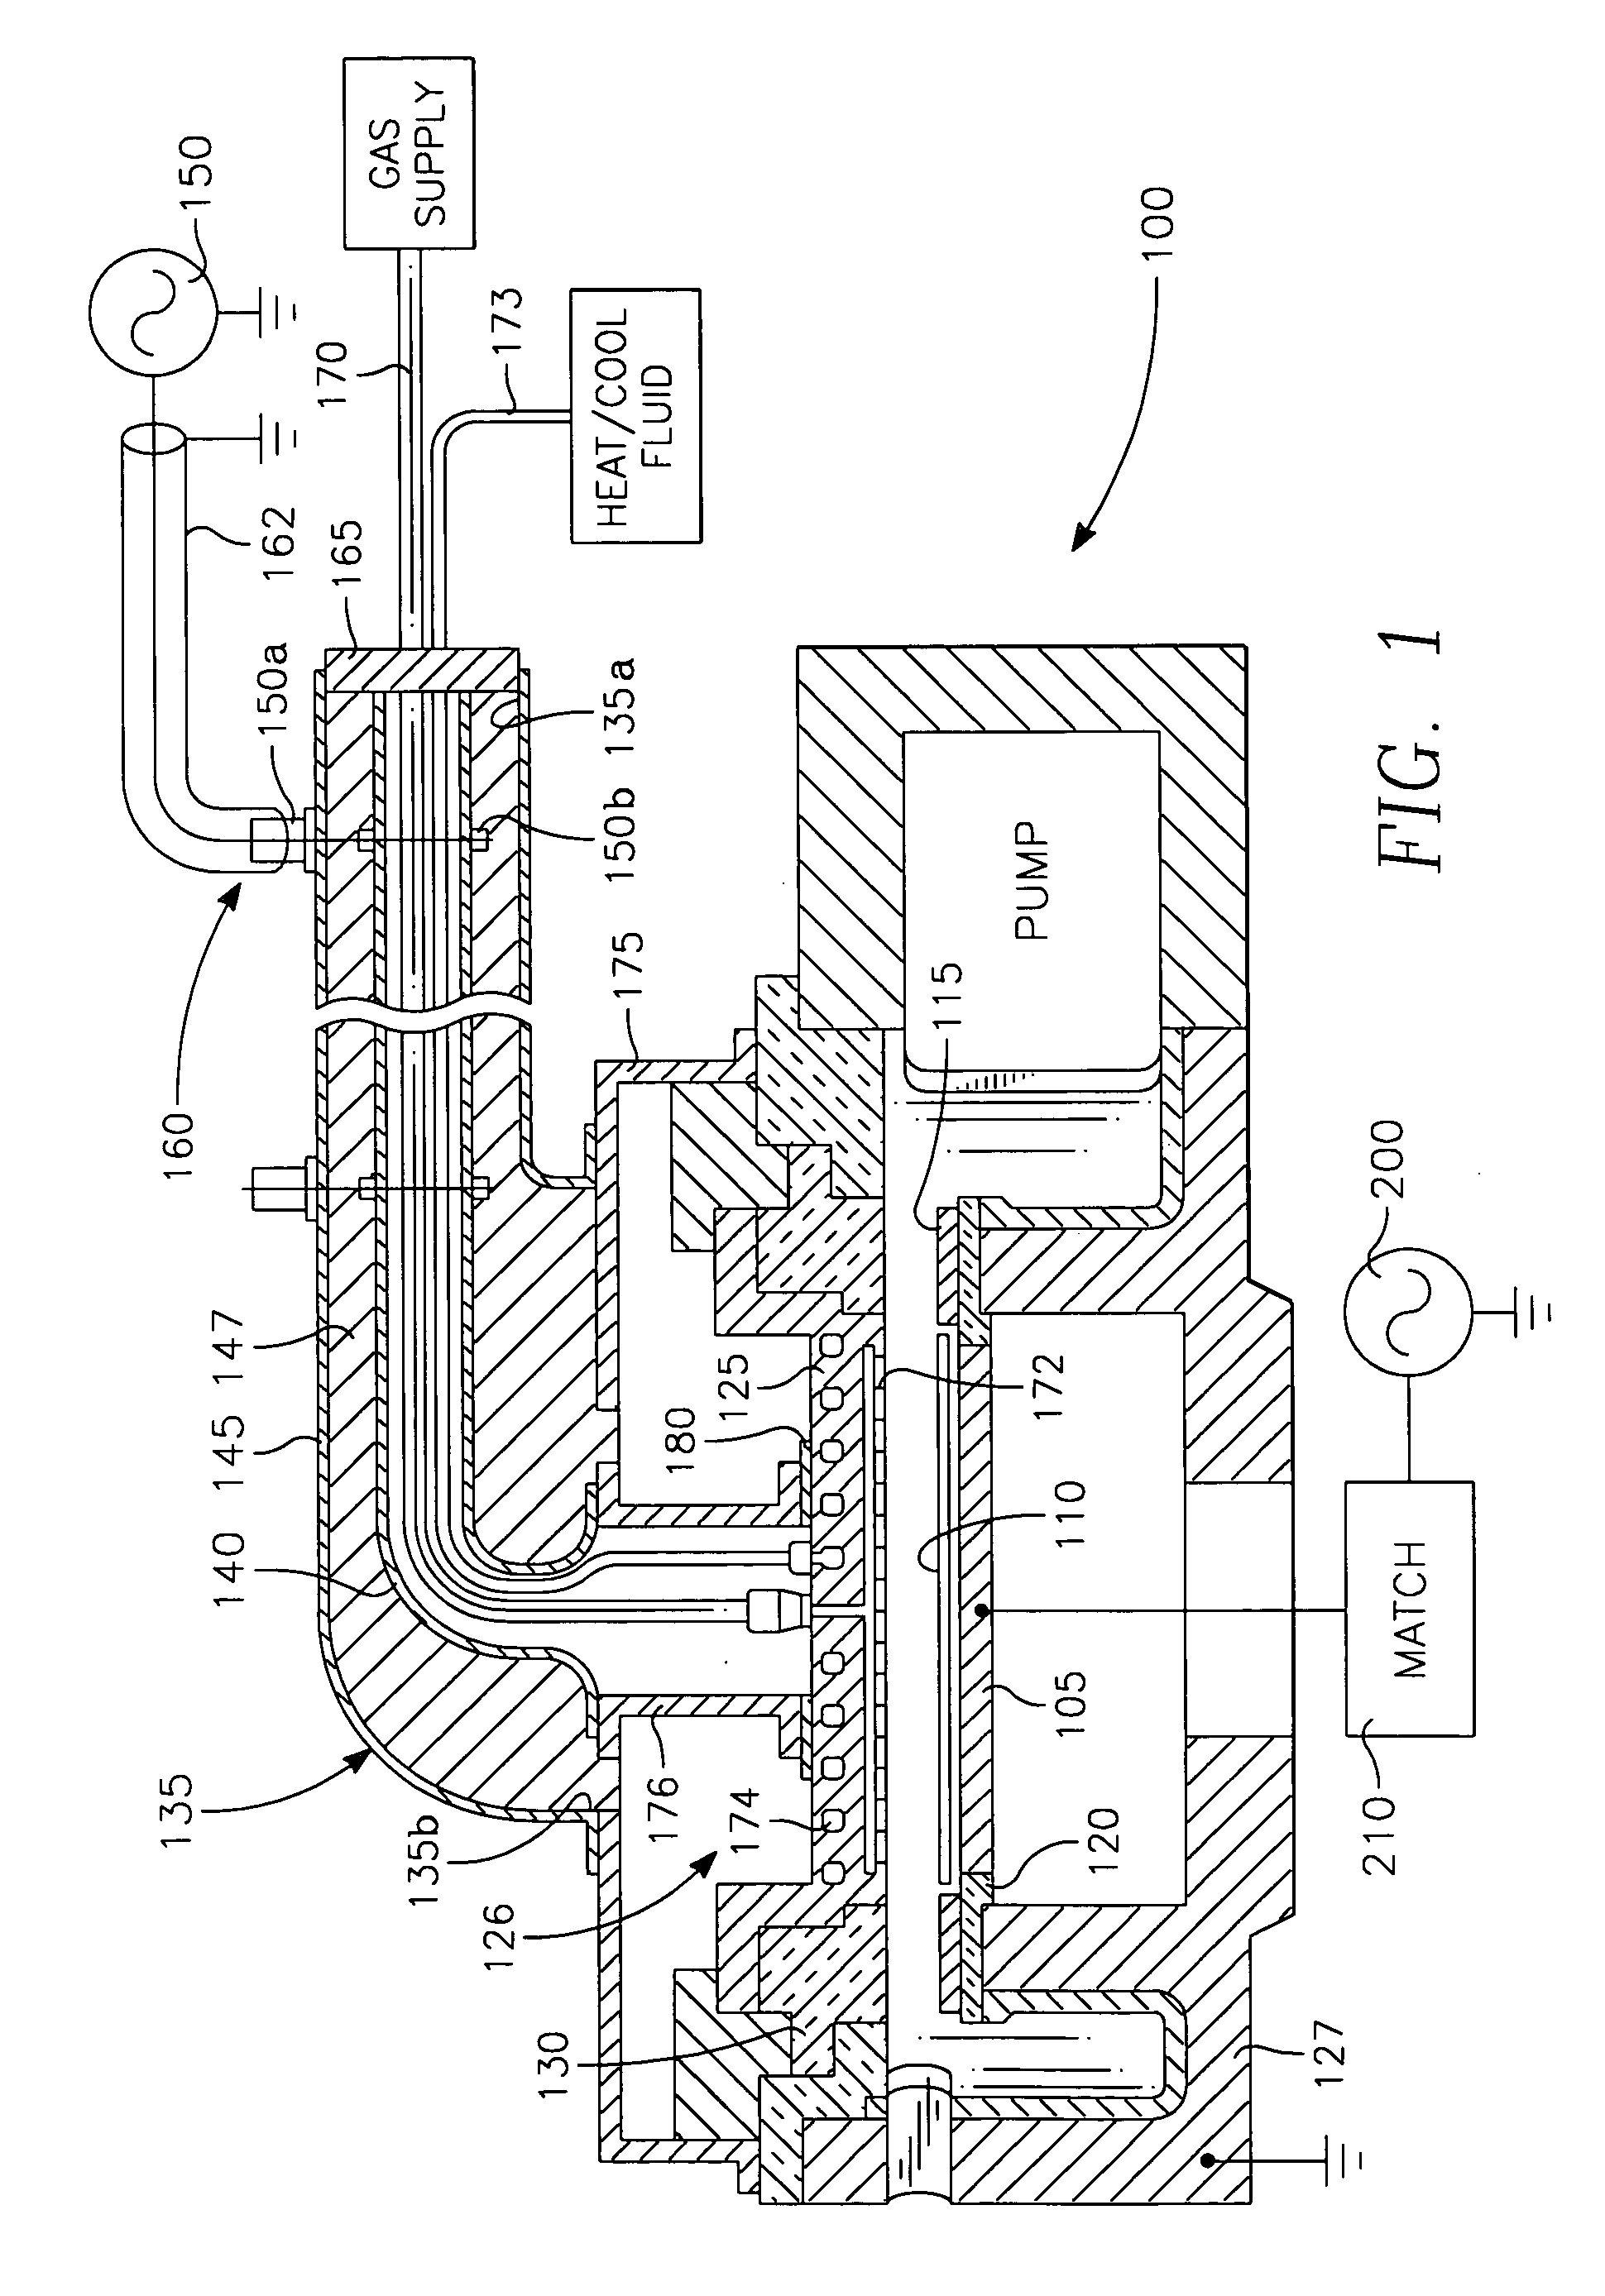 Plasma reactor with overhead RF source power electrode having a resonance that is virtually pressure independent